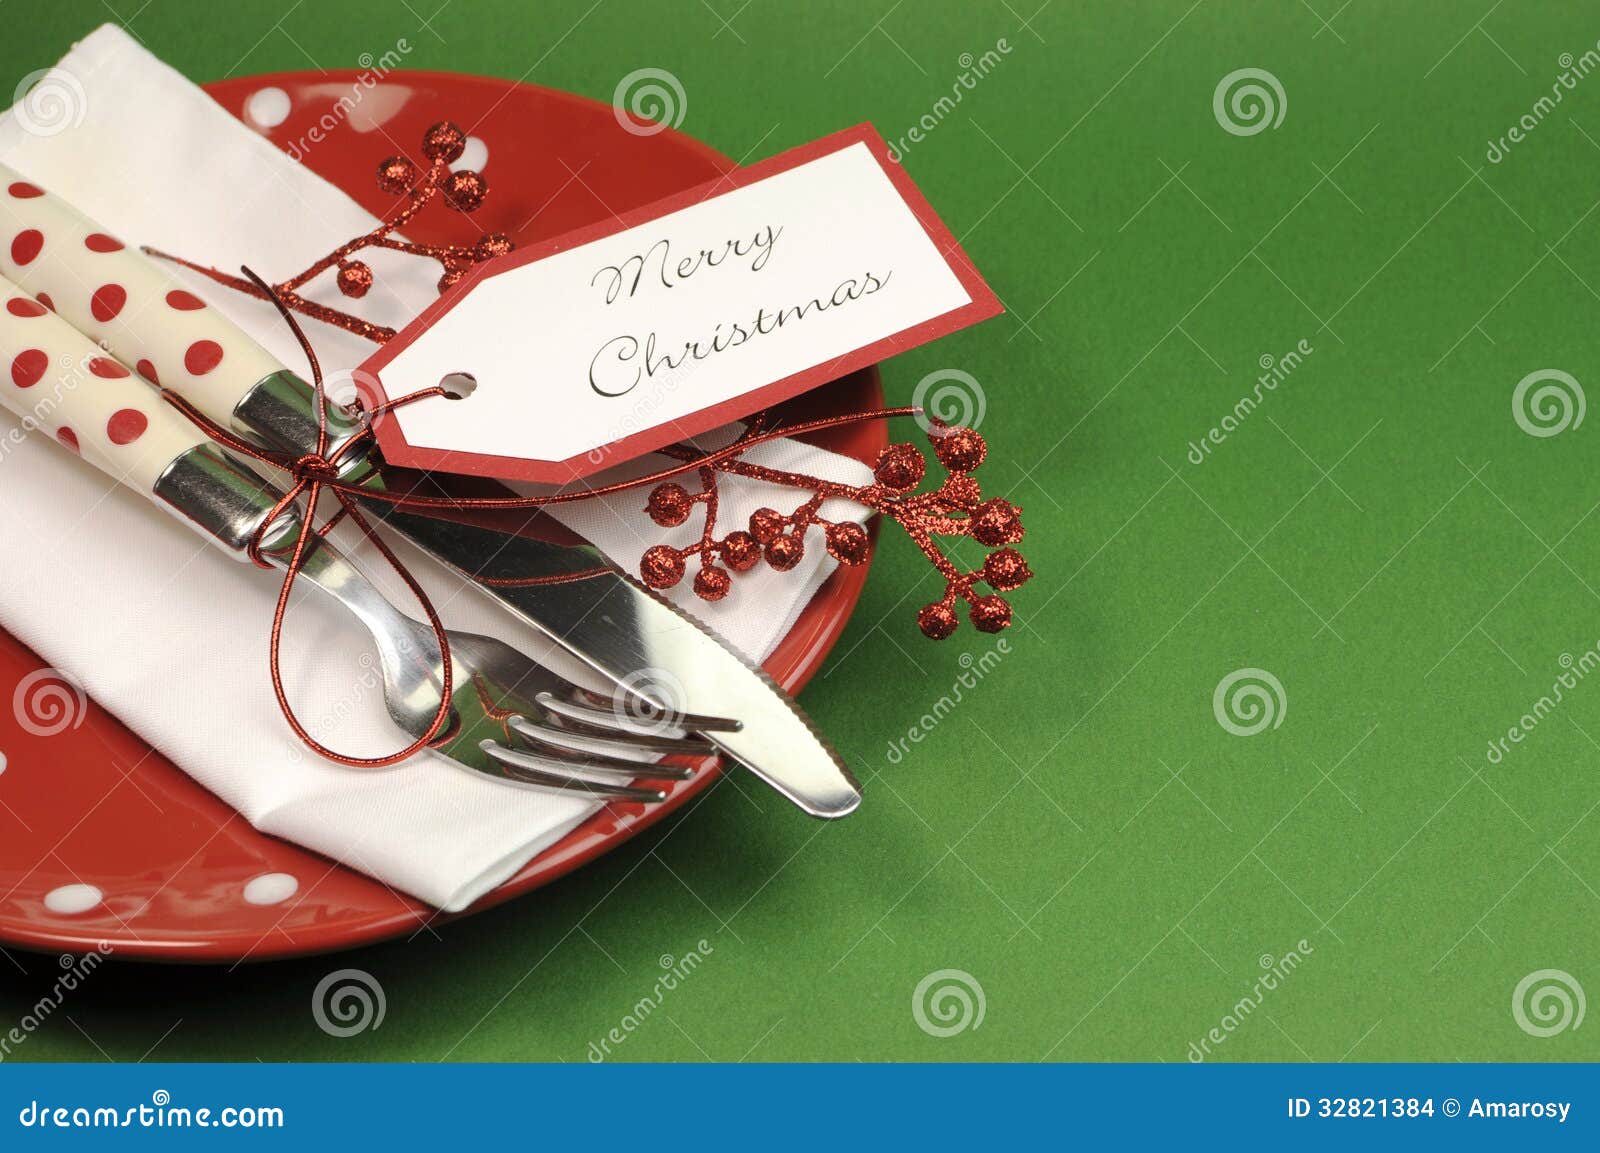 christmas lunch clipart - photo #35